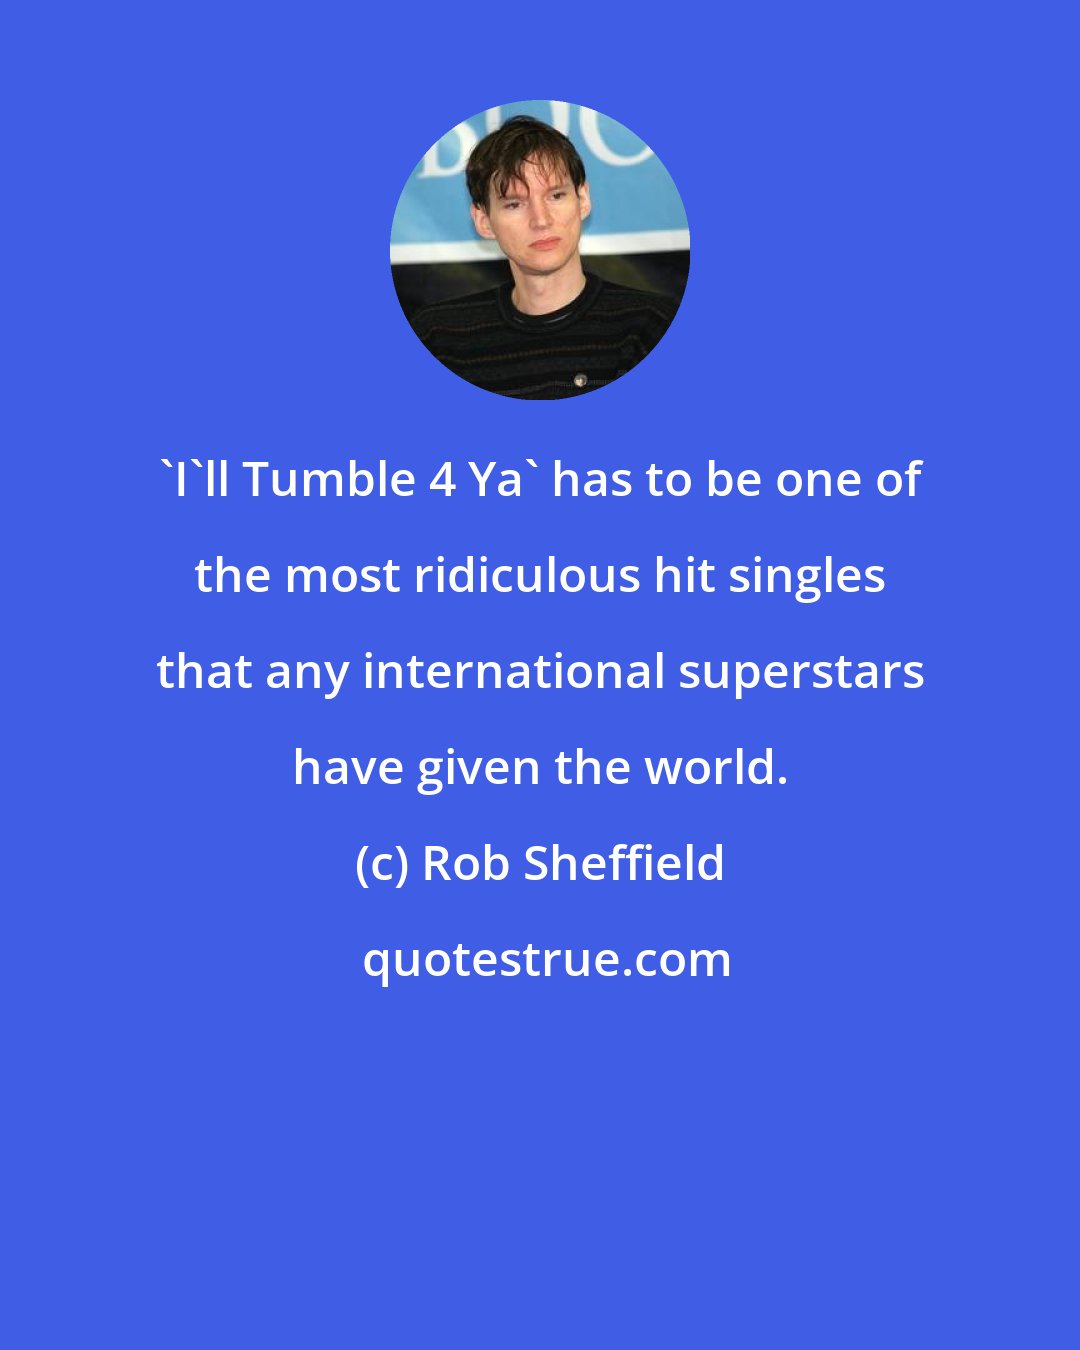 Rob Sheffield: 'I'll Tumble 4 Ya' has to be one of the most ridiculous hit singles that any international superstars have given the world.